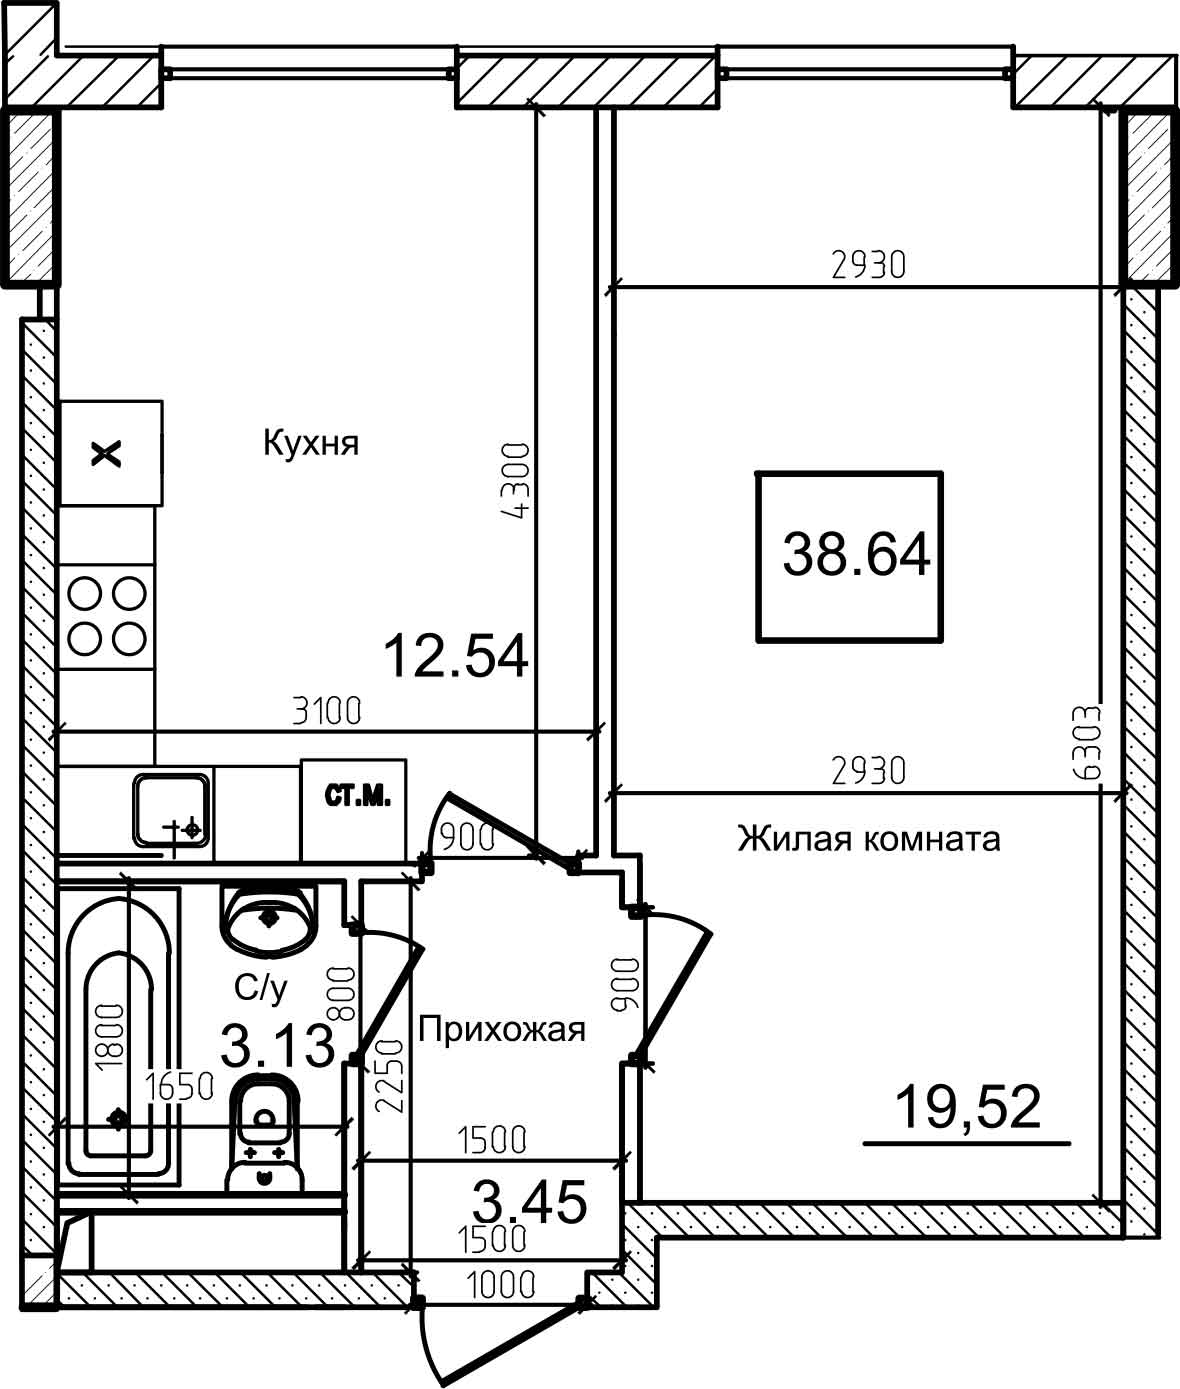 Planning 1-rm flats area 38m2, AB-08-10/00009.